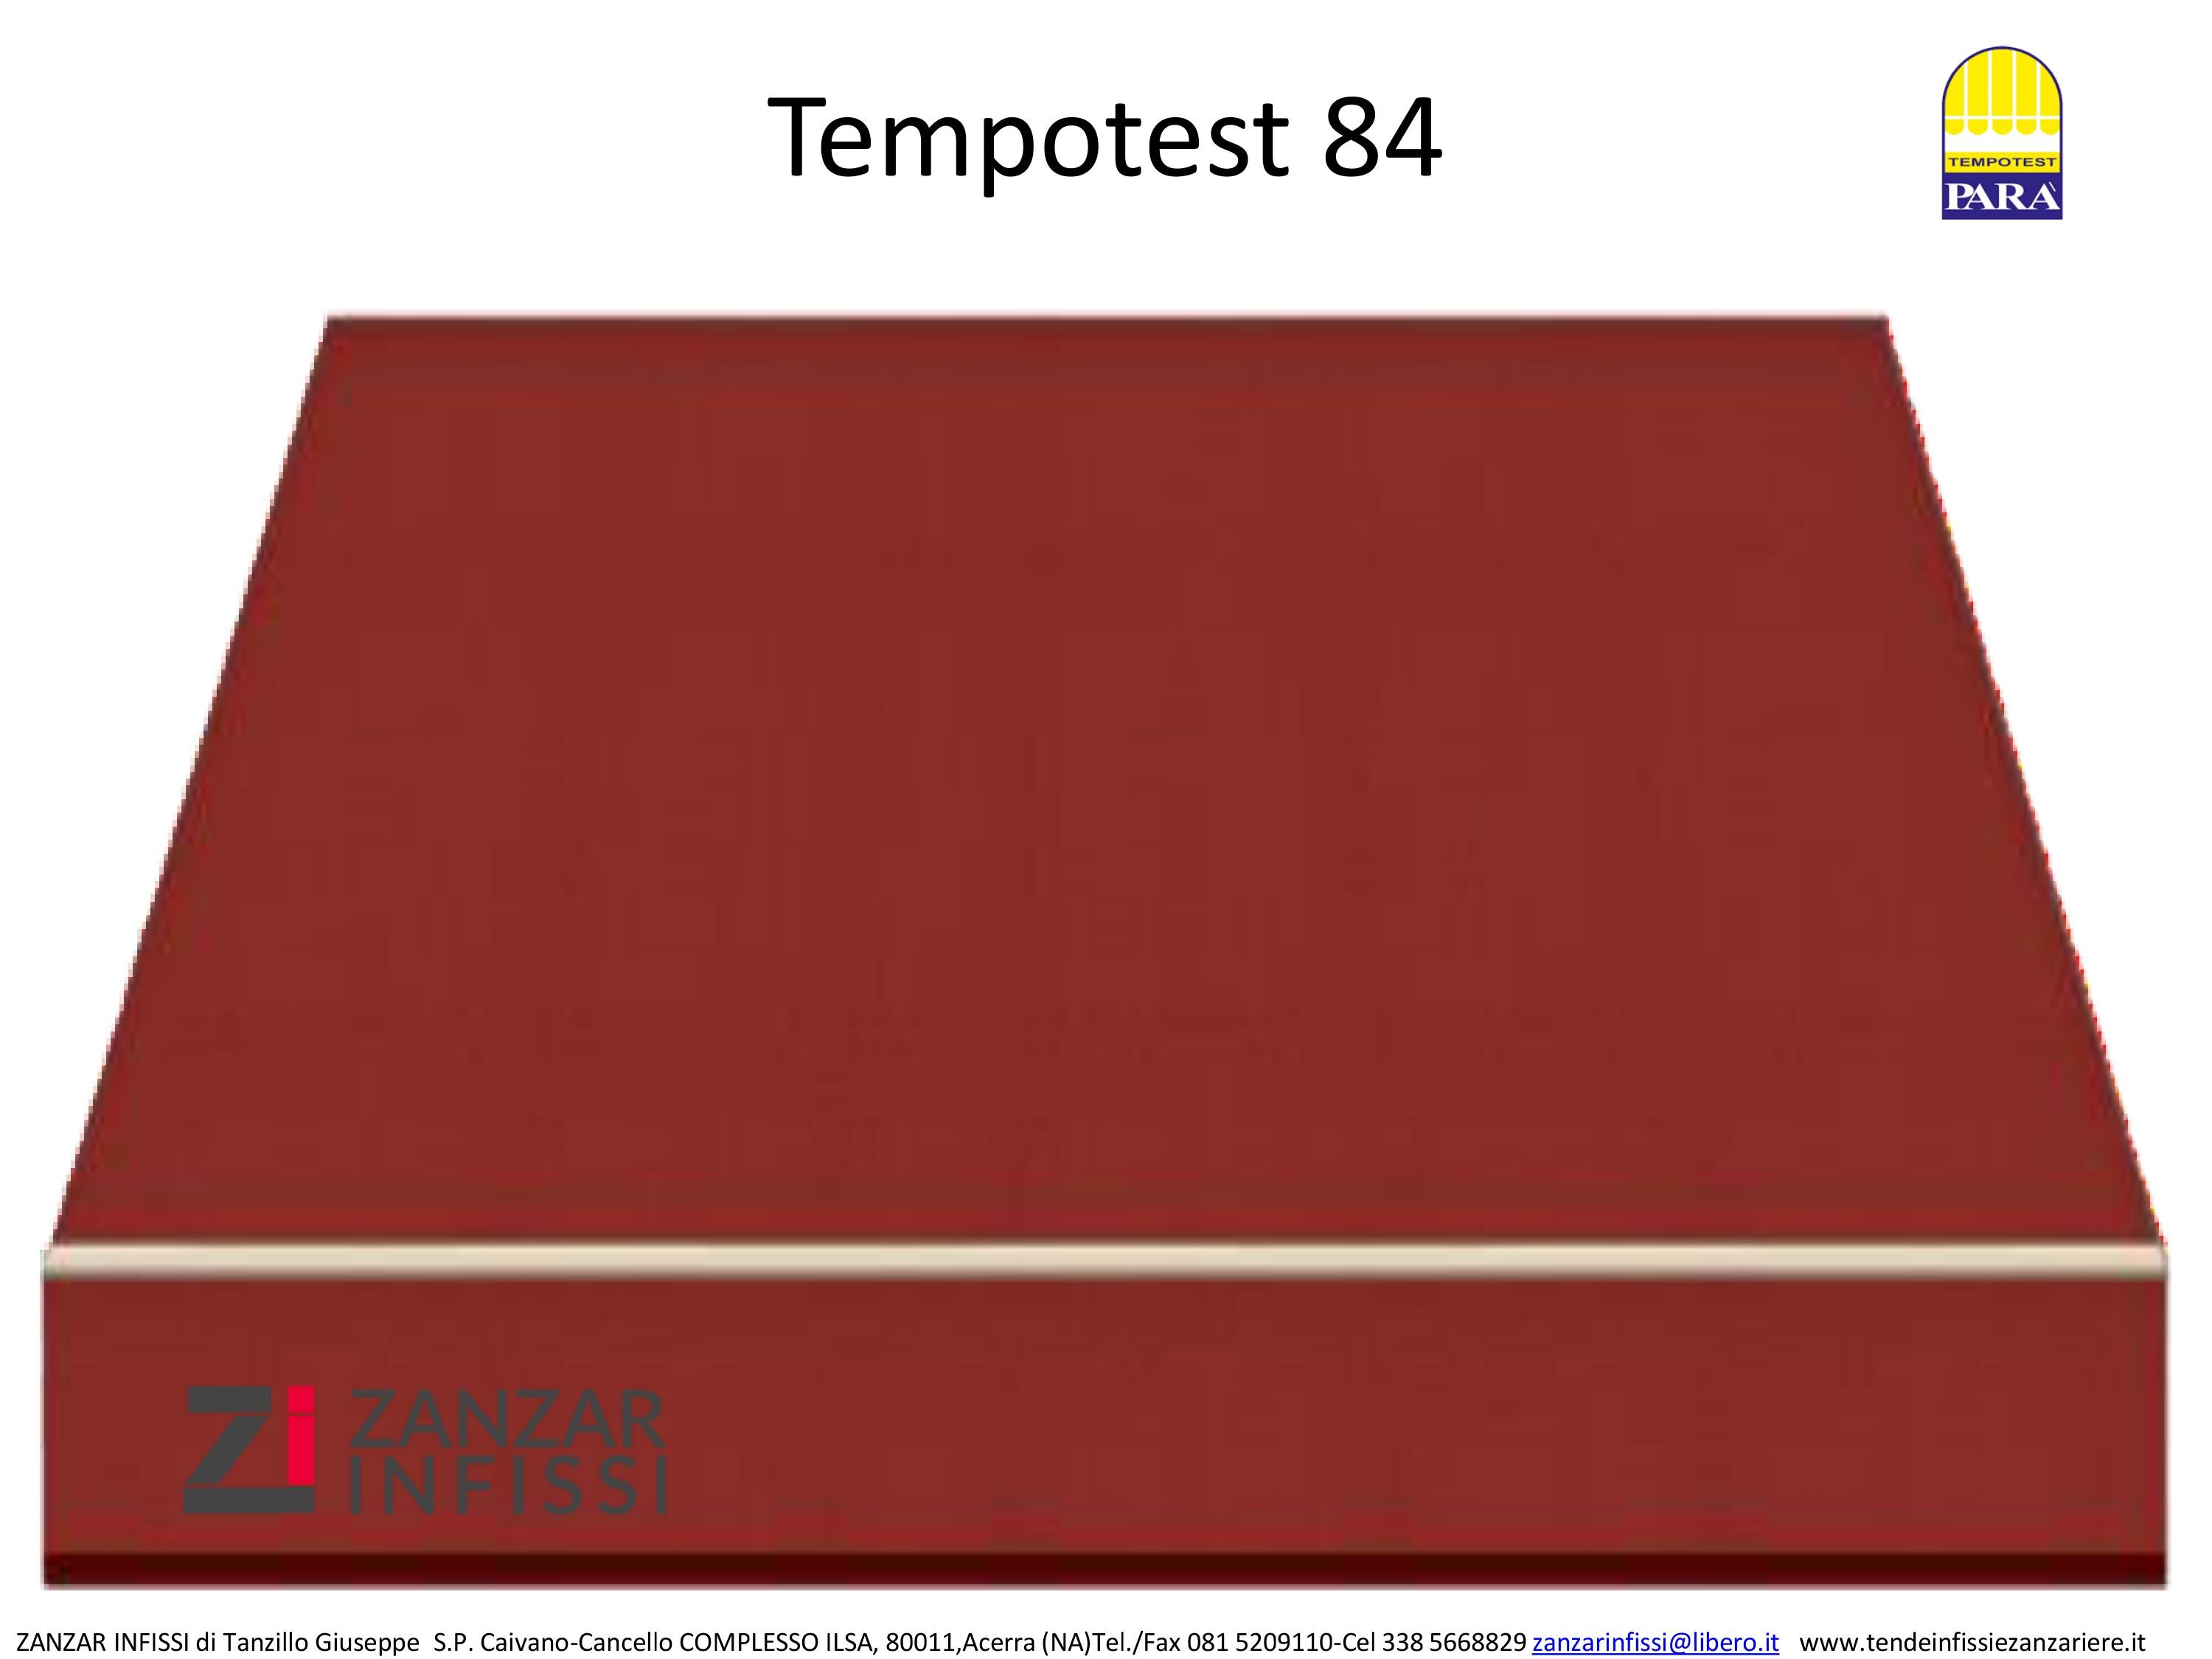 Tempotest 84